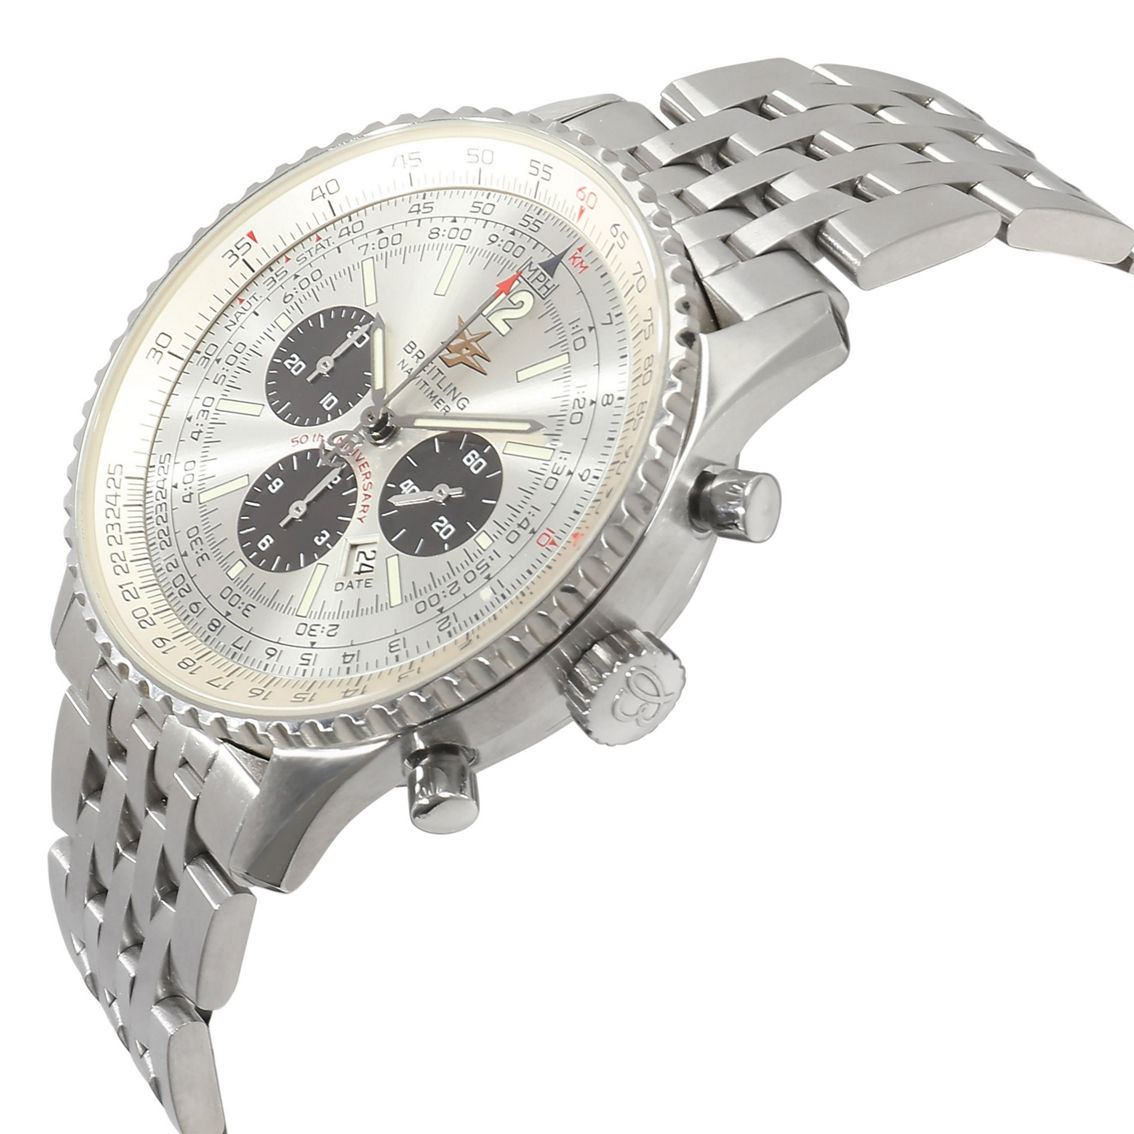 Breitling Navitimer Pre-Owned - Image 2 of 2